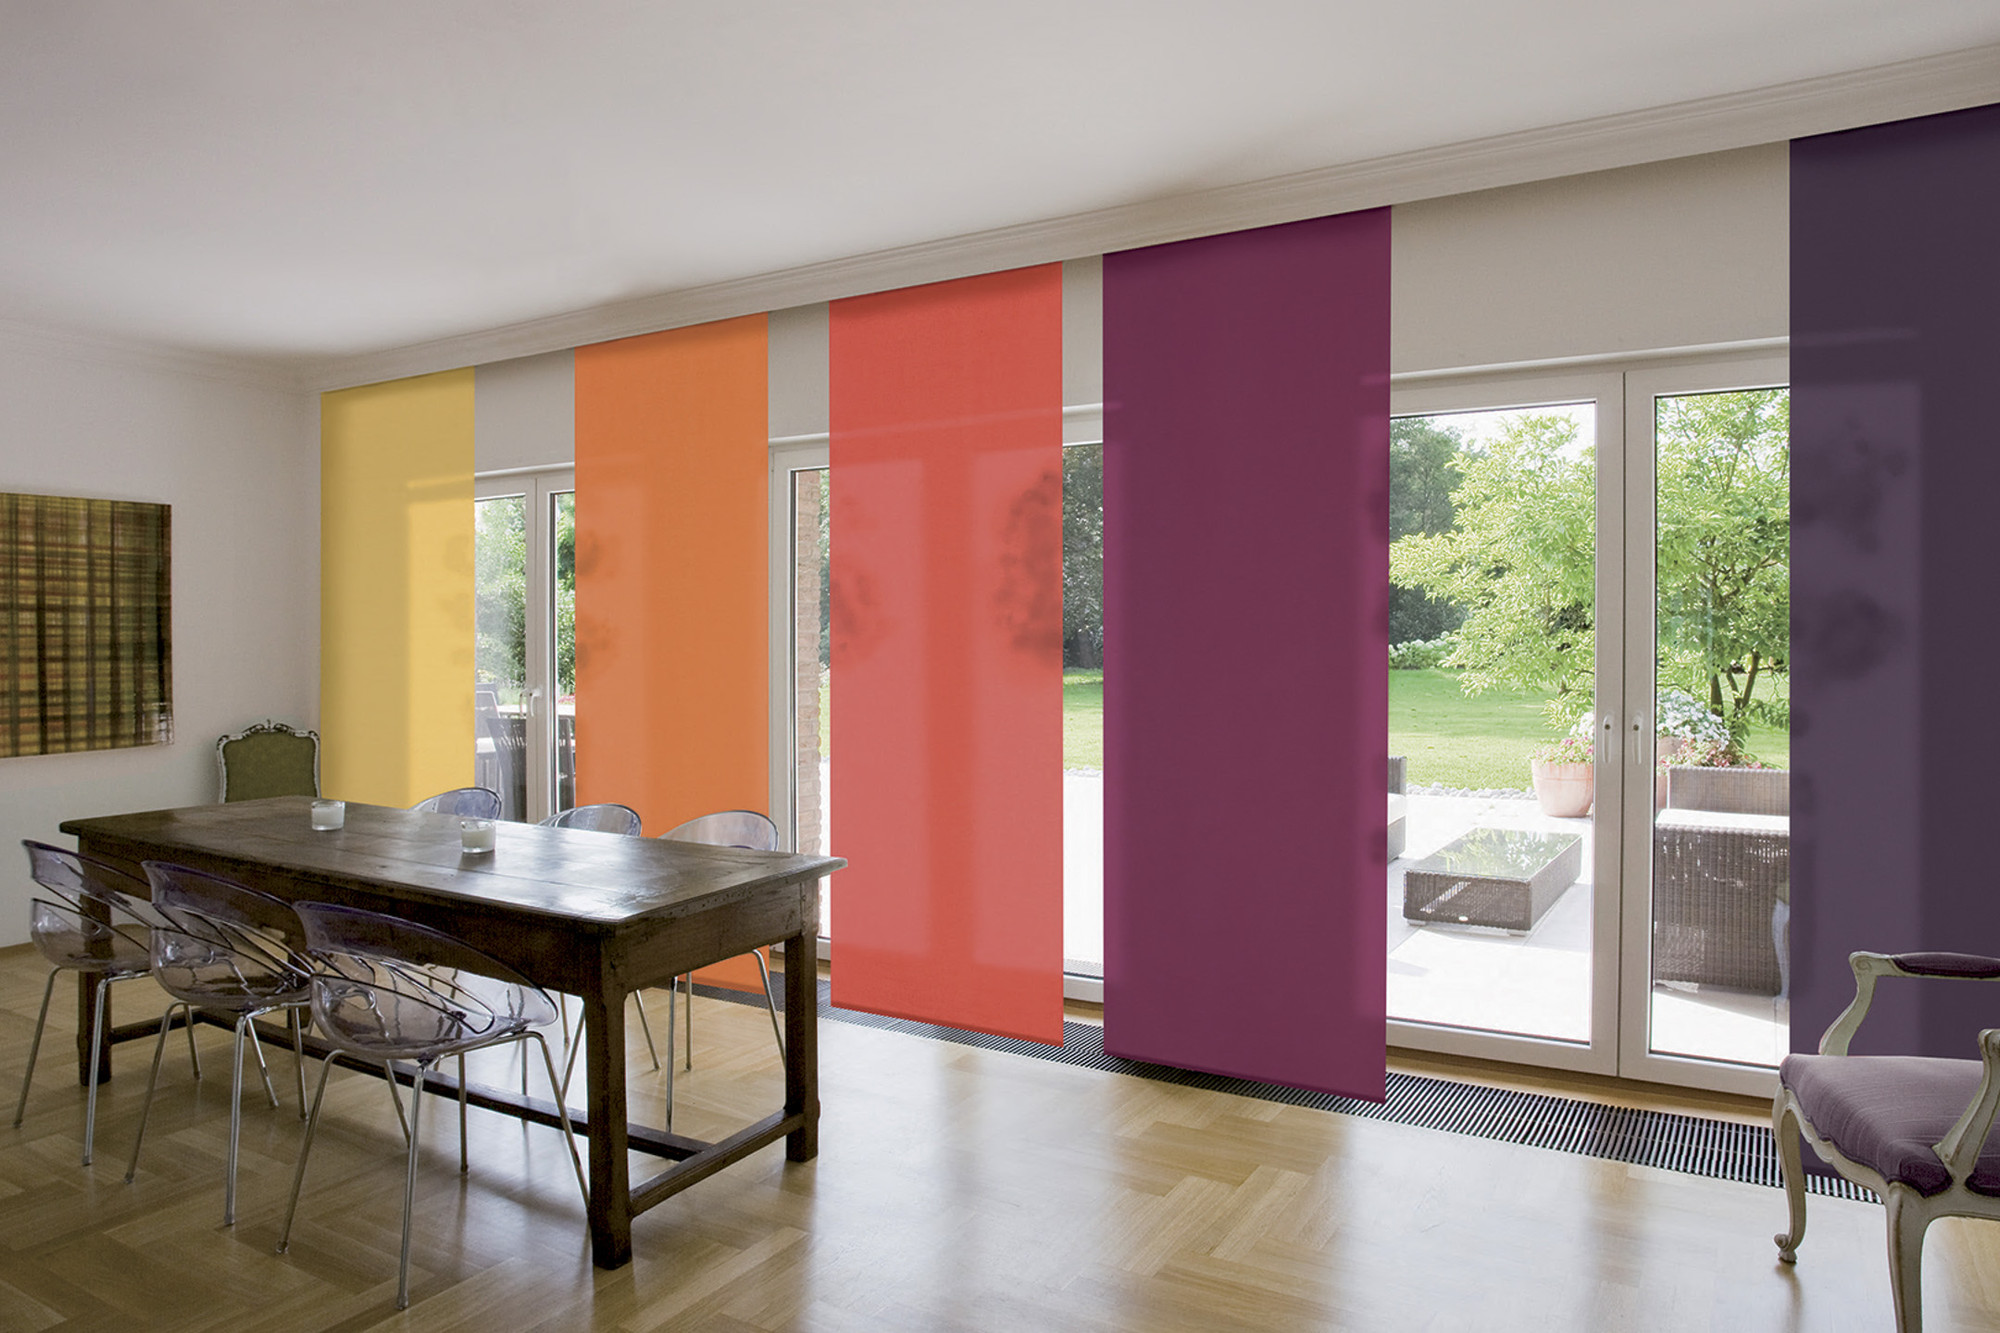 Product: Panel blind